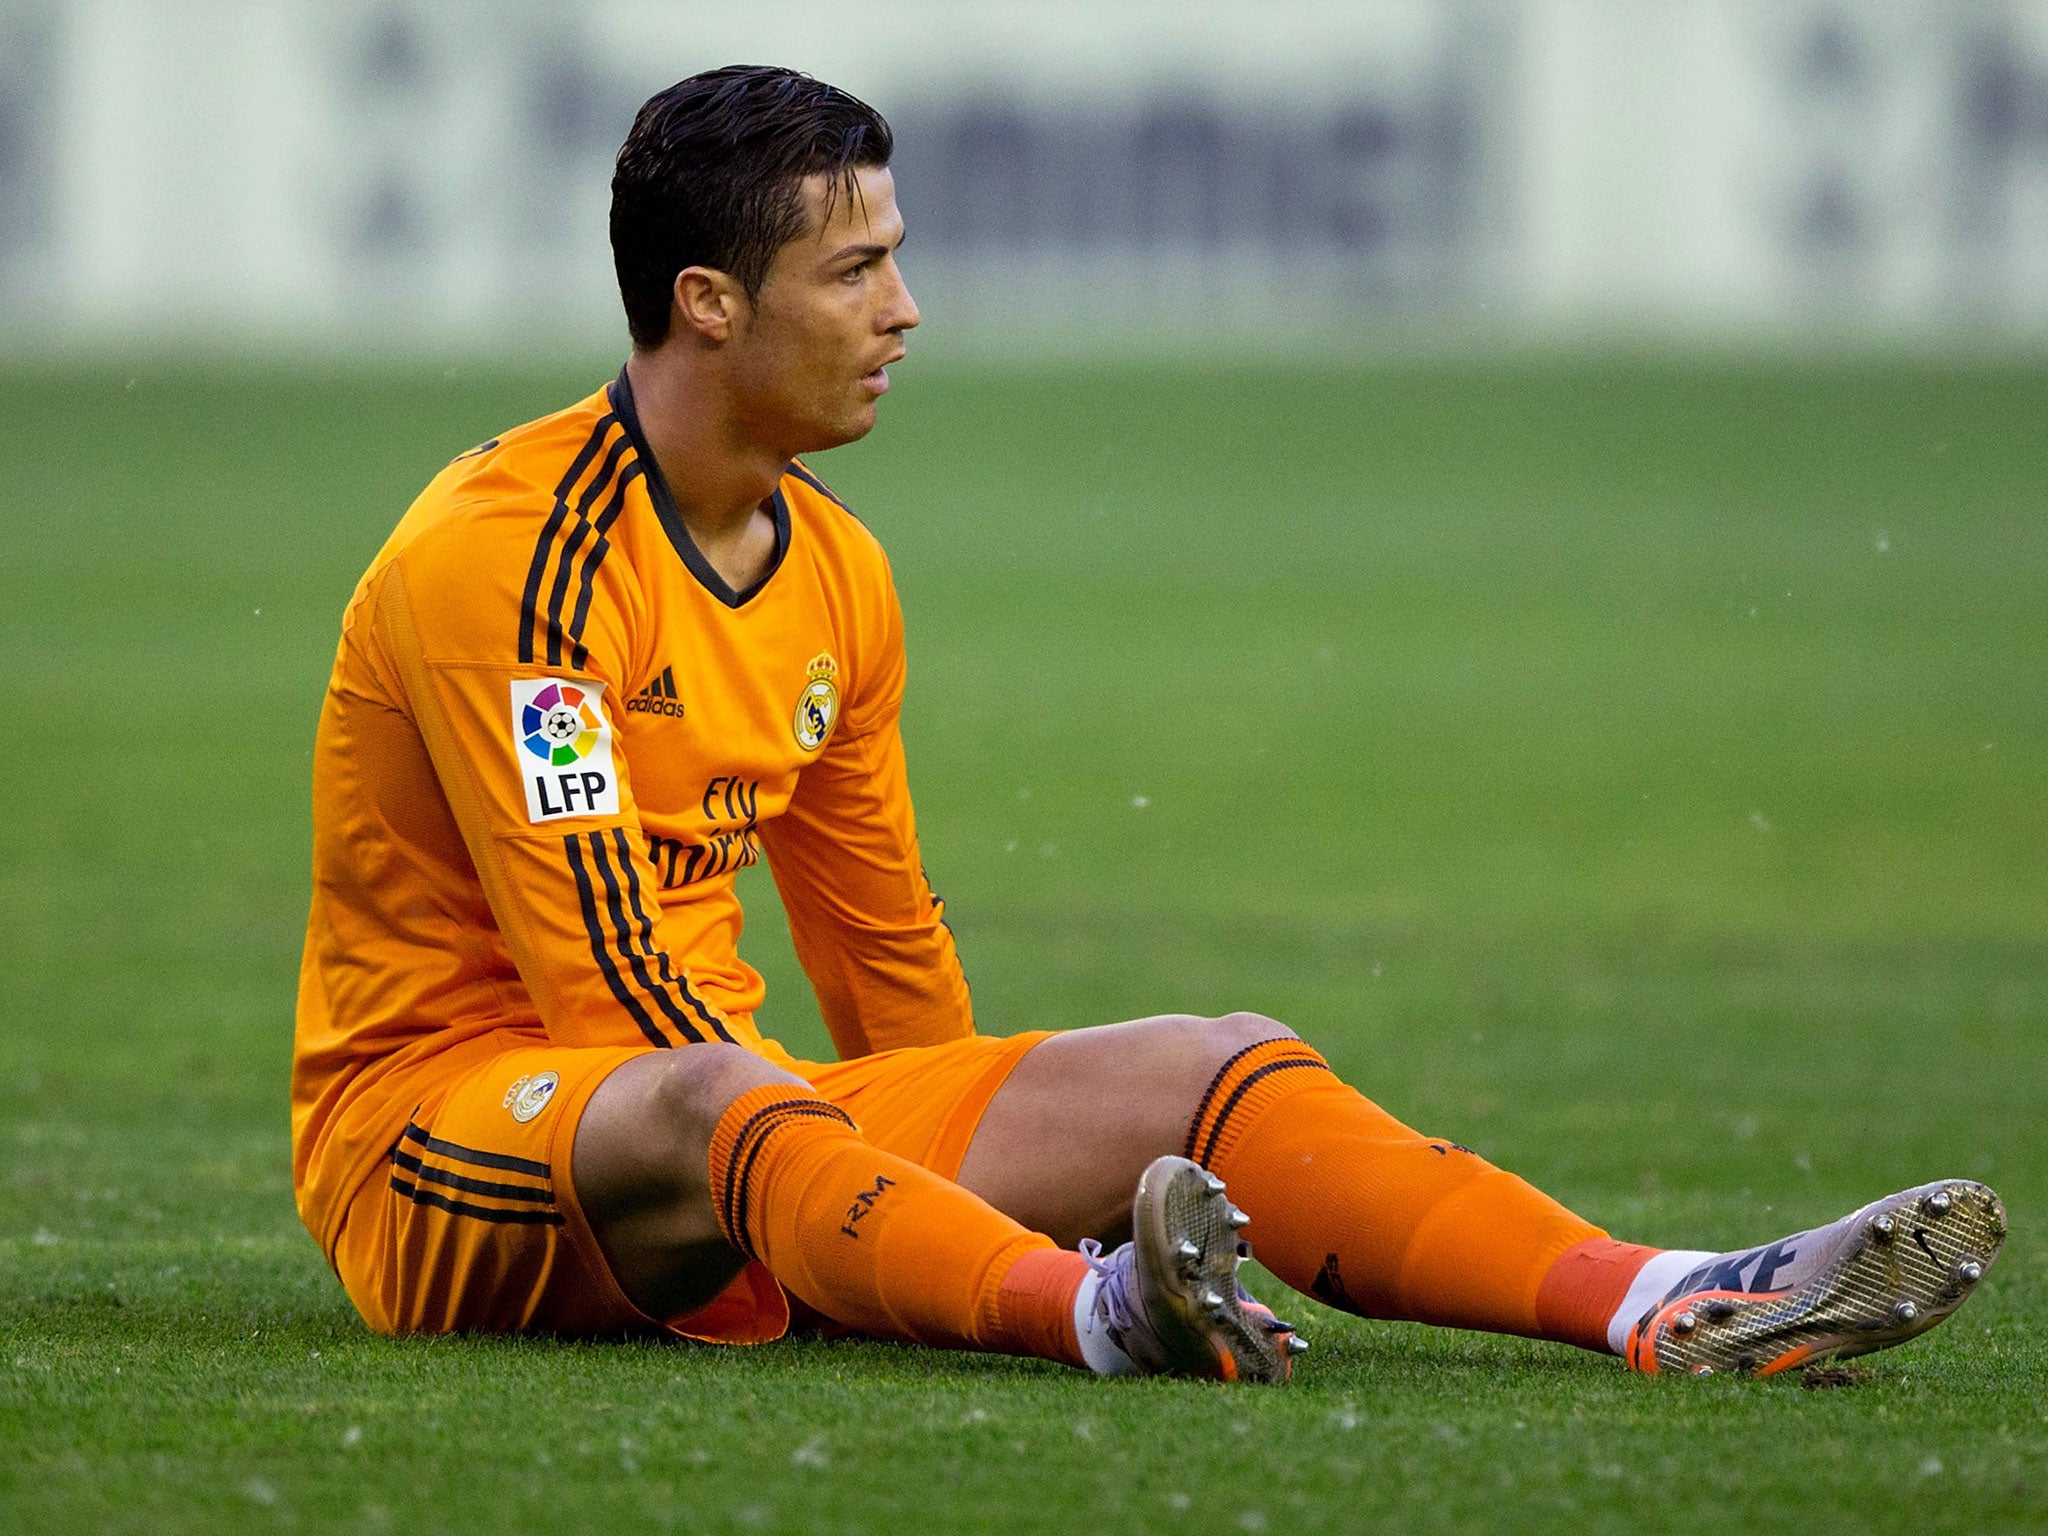 Cristiano Ronaldo injury: Real Madrid star a doubt for Champions